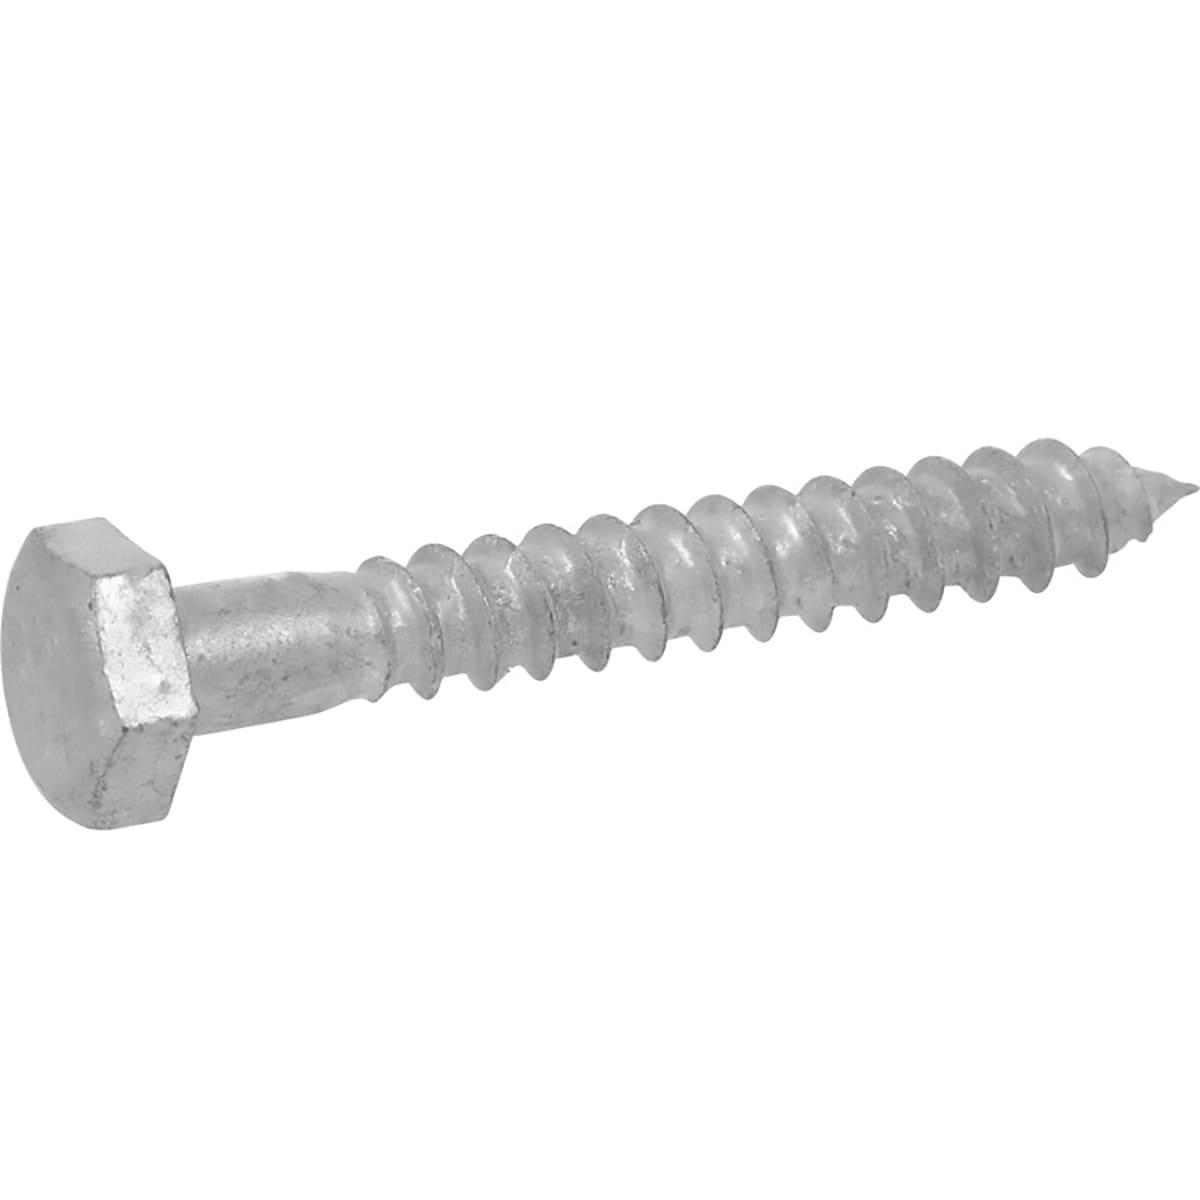 50-Count Crown Bolt 11310 3/8 Inch x 3 Inch Hot Dipped Galvanized Steel Hex-Head Lag Screws